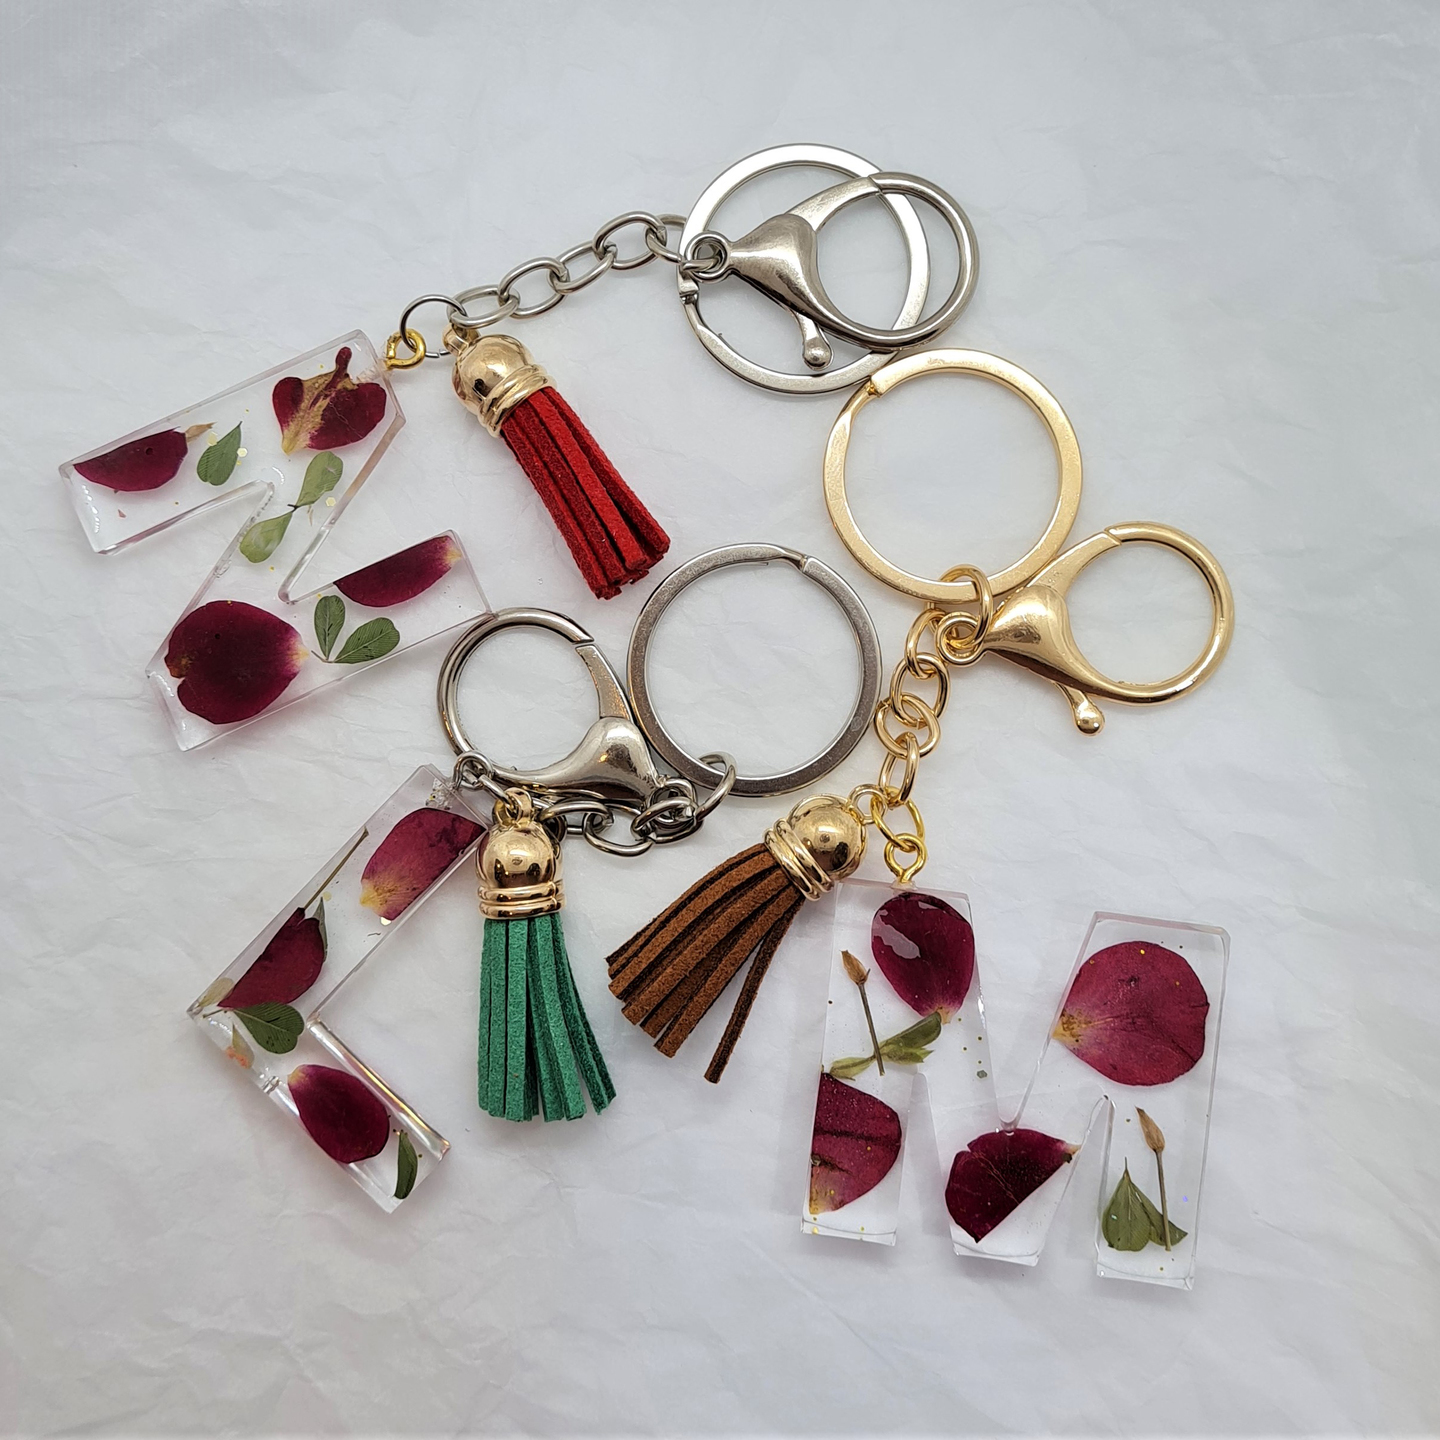 Real pressed flowers resin keychain handmade custom initial hand bag charm contact tracing tag